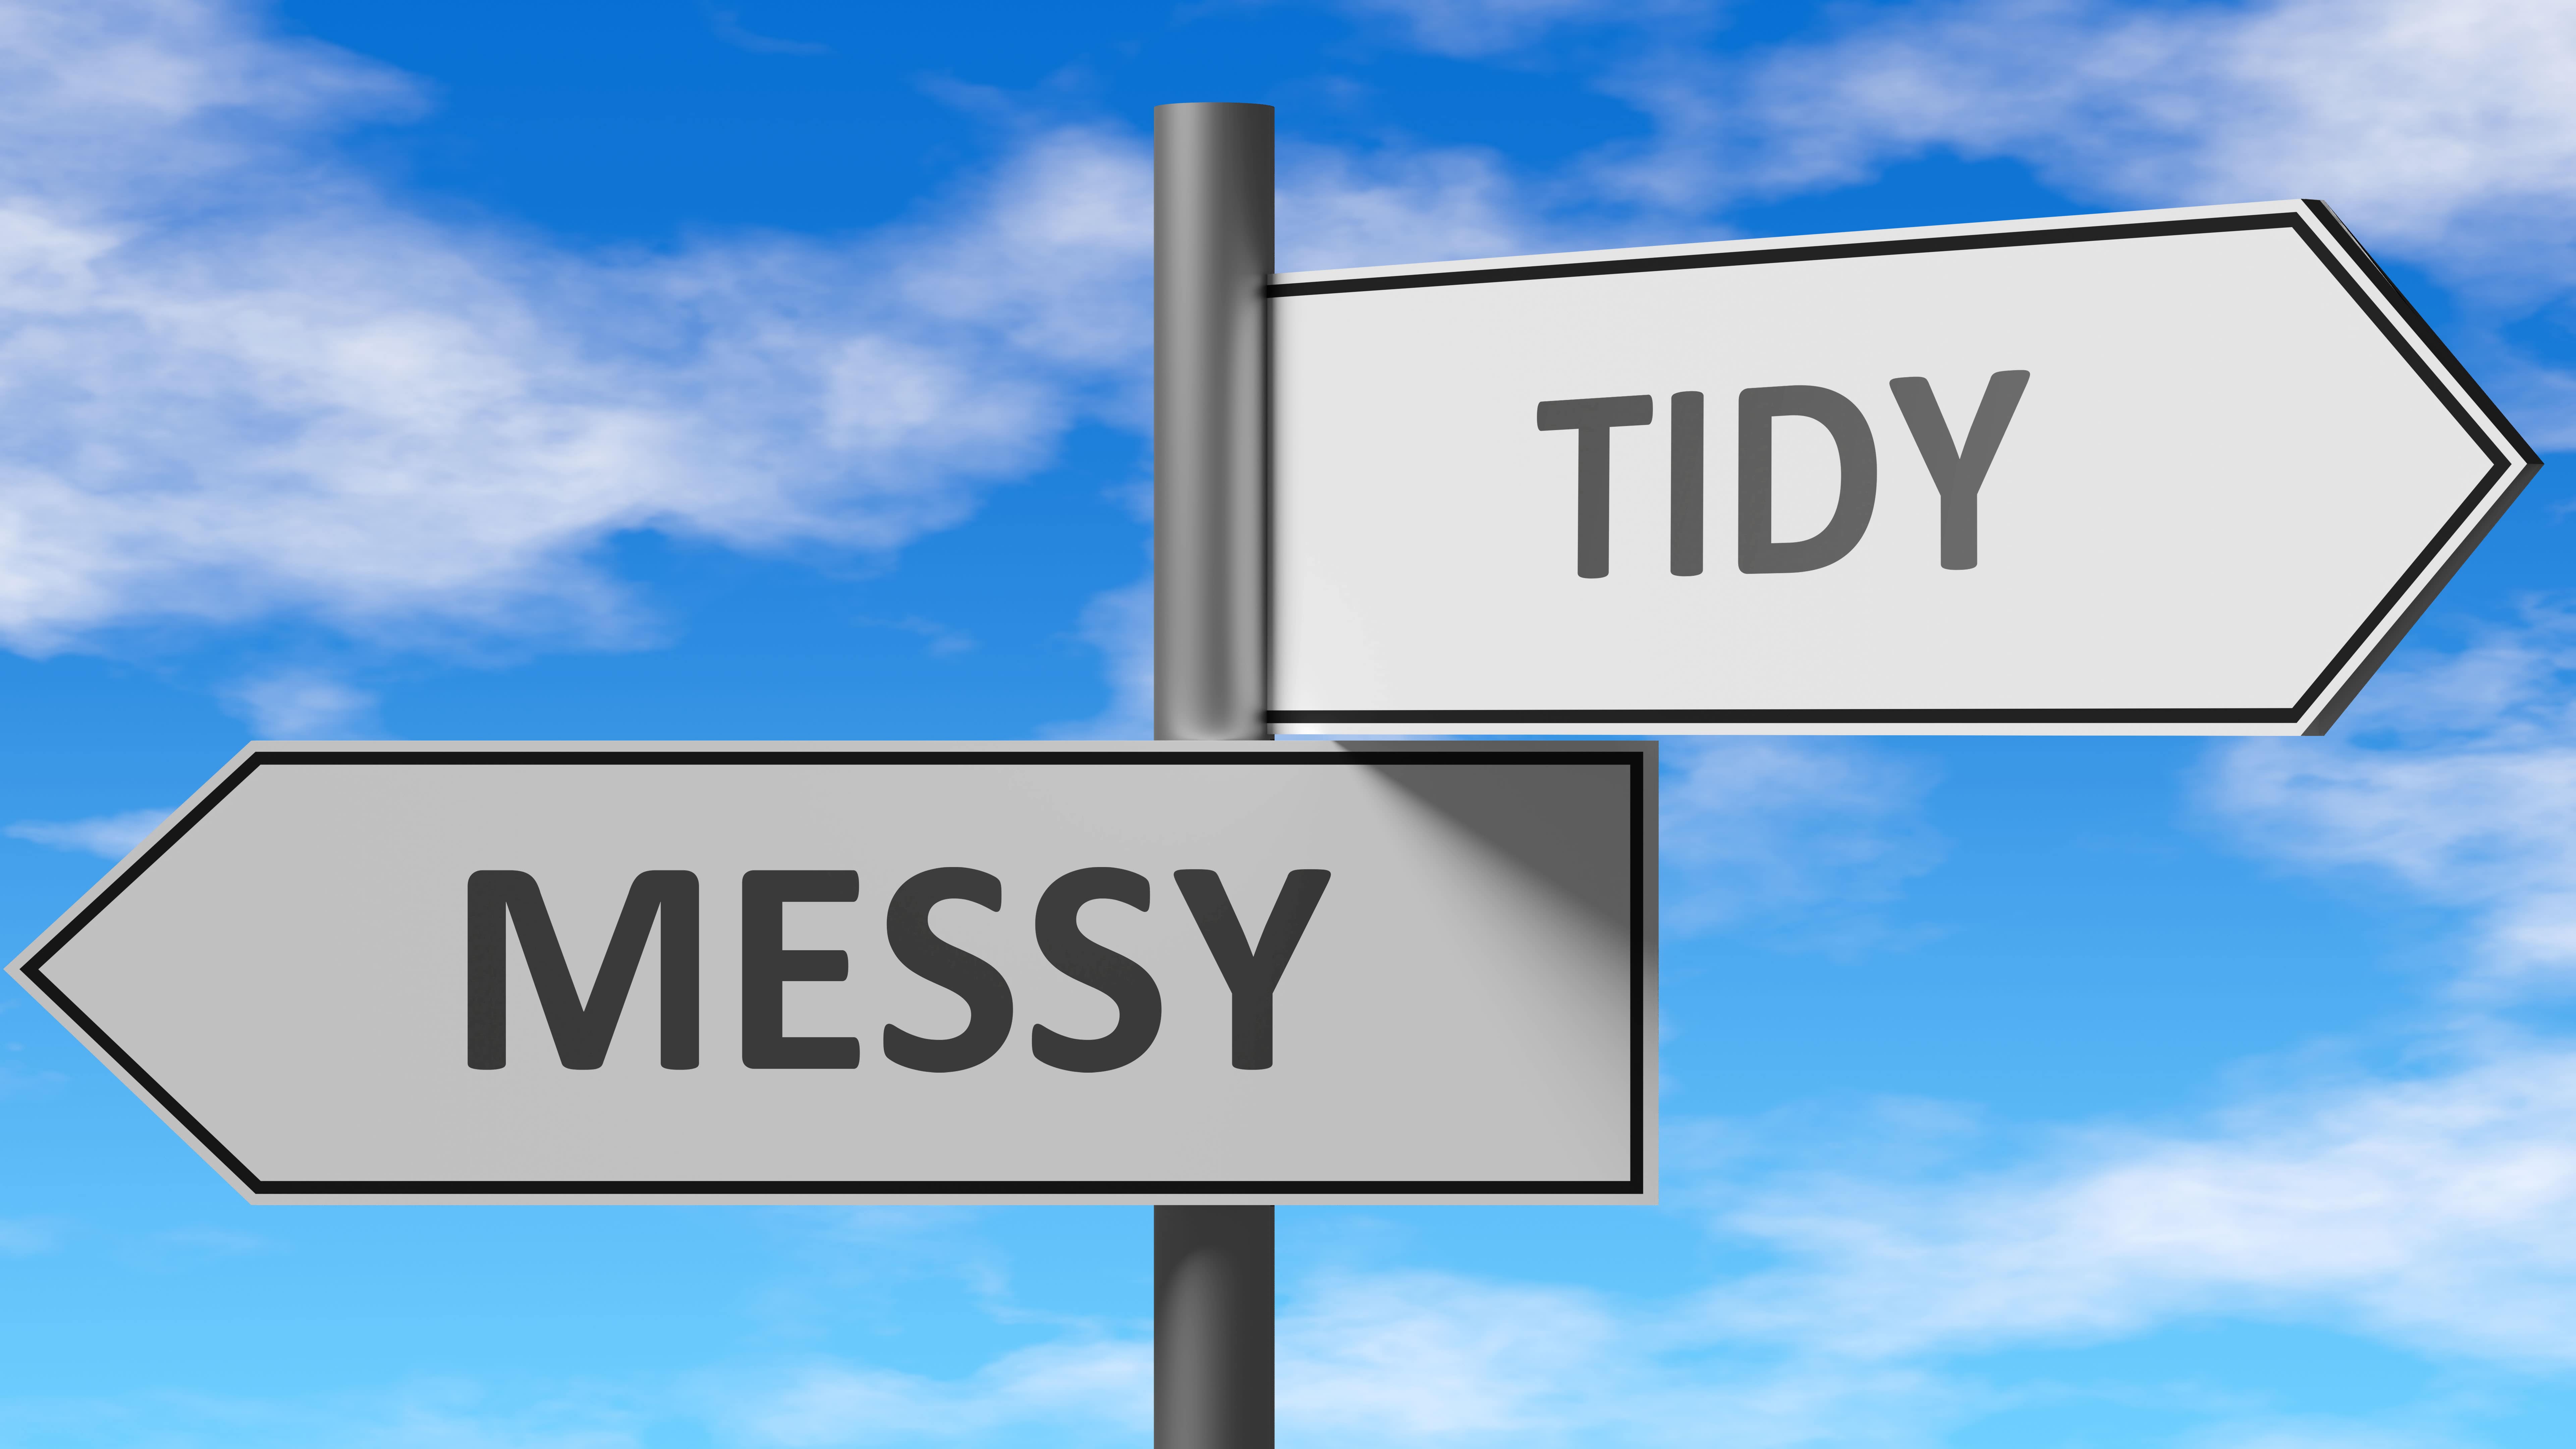 the words tidy and messy on opposing signs against a blue sky backdrop.